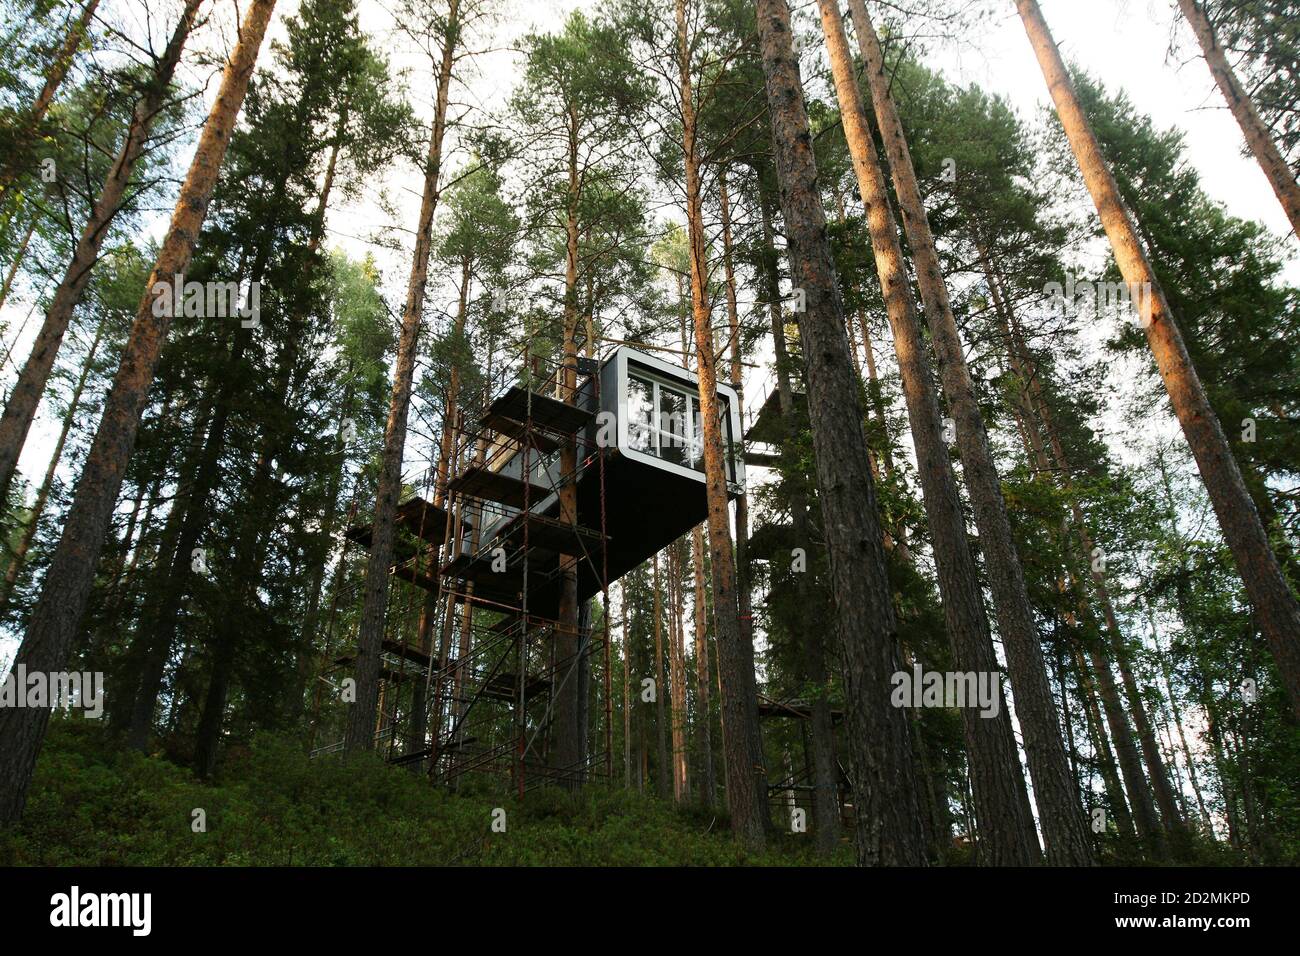 The Cabin is seen under construction on the site of Treehotel in the Swedish village of Harads, July 5, 2010. A lofty new hotel concept is set to open in a remote village in northern Sweden, which aims to elevate the simple treehouse into a world-class destination for design-conscious travellers. Treehotel, located in Harads about 60 km south of the Arctic Circle, will consist of four rooms when it opens on July 17th: The Cabin, The Blue Cone, The Nest and The Mirrorcube. Picture taken July 5, 2010.     To match Reuters Life! SWEDEN-TREEHOTEL/    REUTERS/Matt Cowan    (SWEDEN  - Tags: ENVIRONM Stock Photo